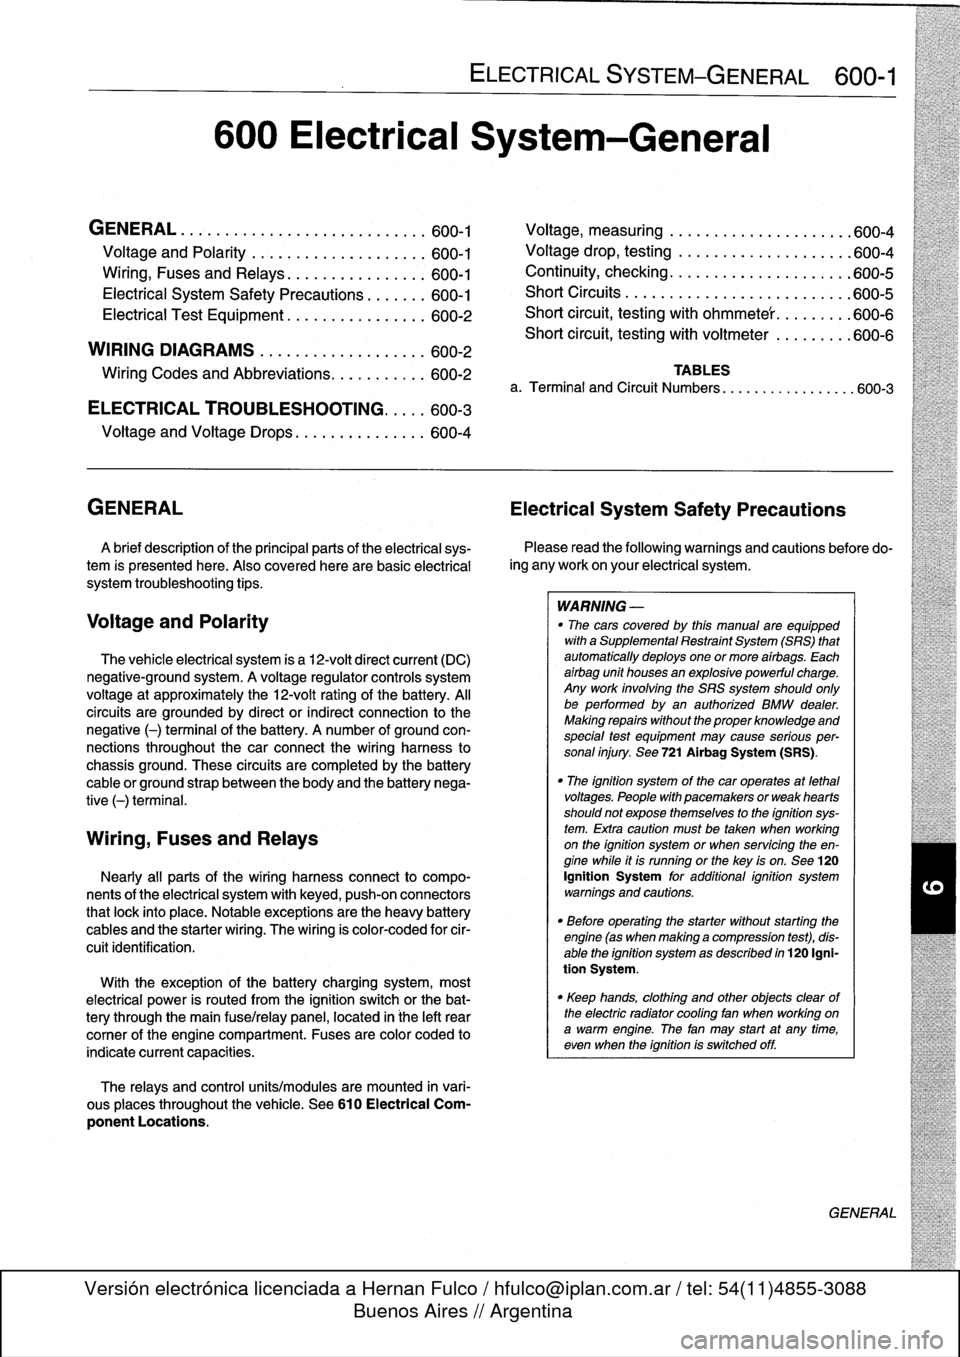 BMW 323i 1993 E36 Workshop Manual 
600
Electrical
System-General

GENERAL
.
...........
.
.
.
.
.
.
.
.
.
...
.
...
600-1

Voltage
and
Polarity
........
.
.
.
.
.
.
.
.....
600-1

Ming,
Fuses
and
Relays
............
.
.
.
.
600-1

Ele